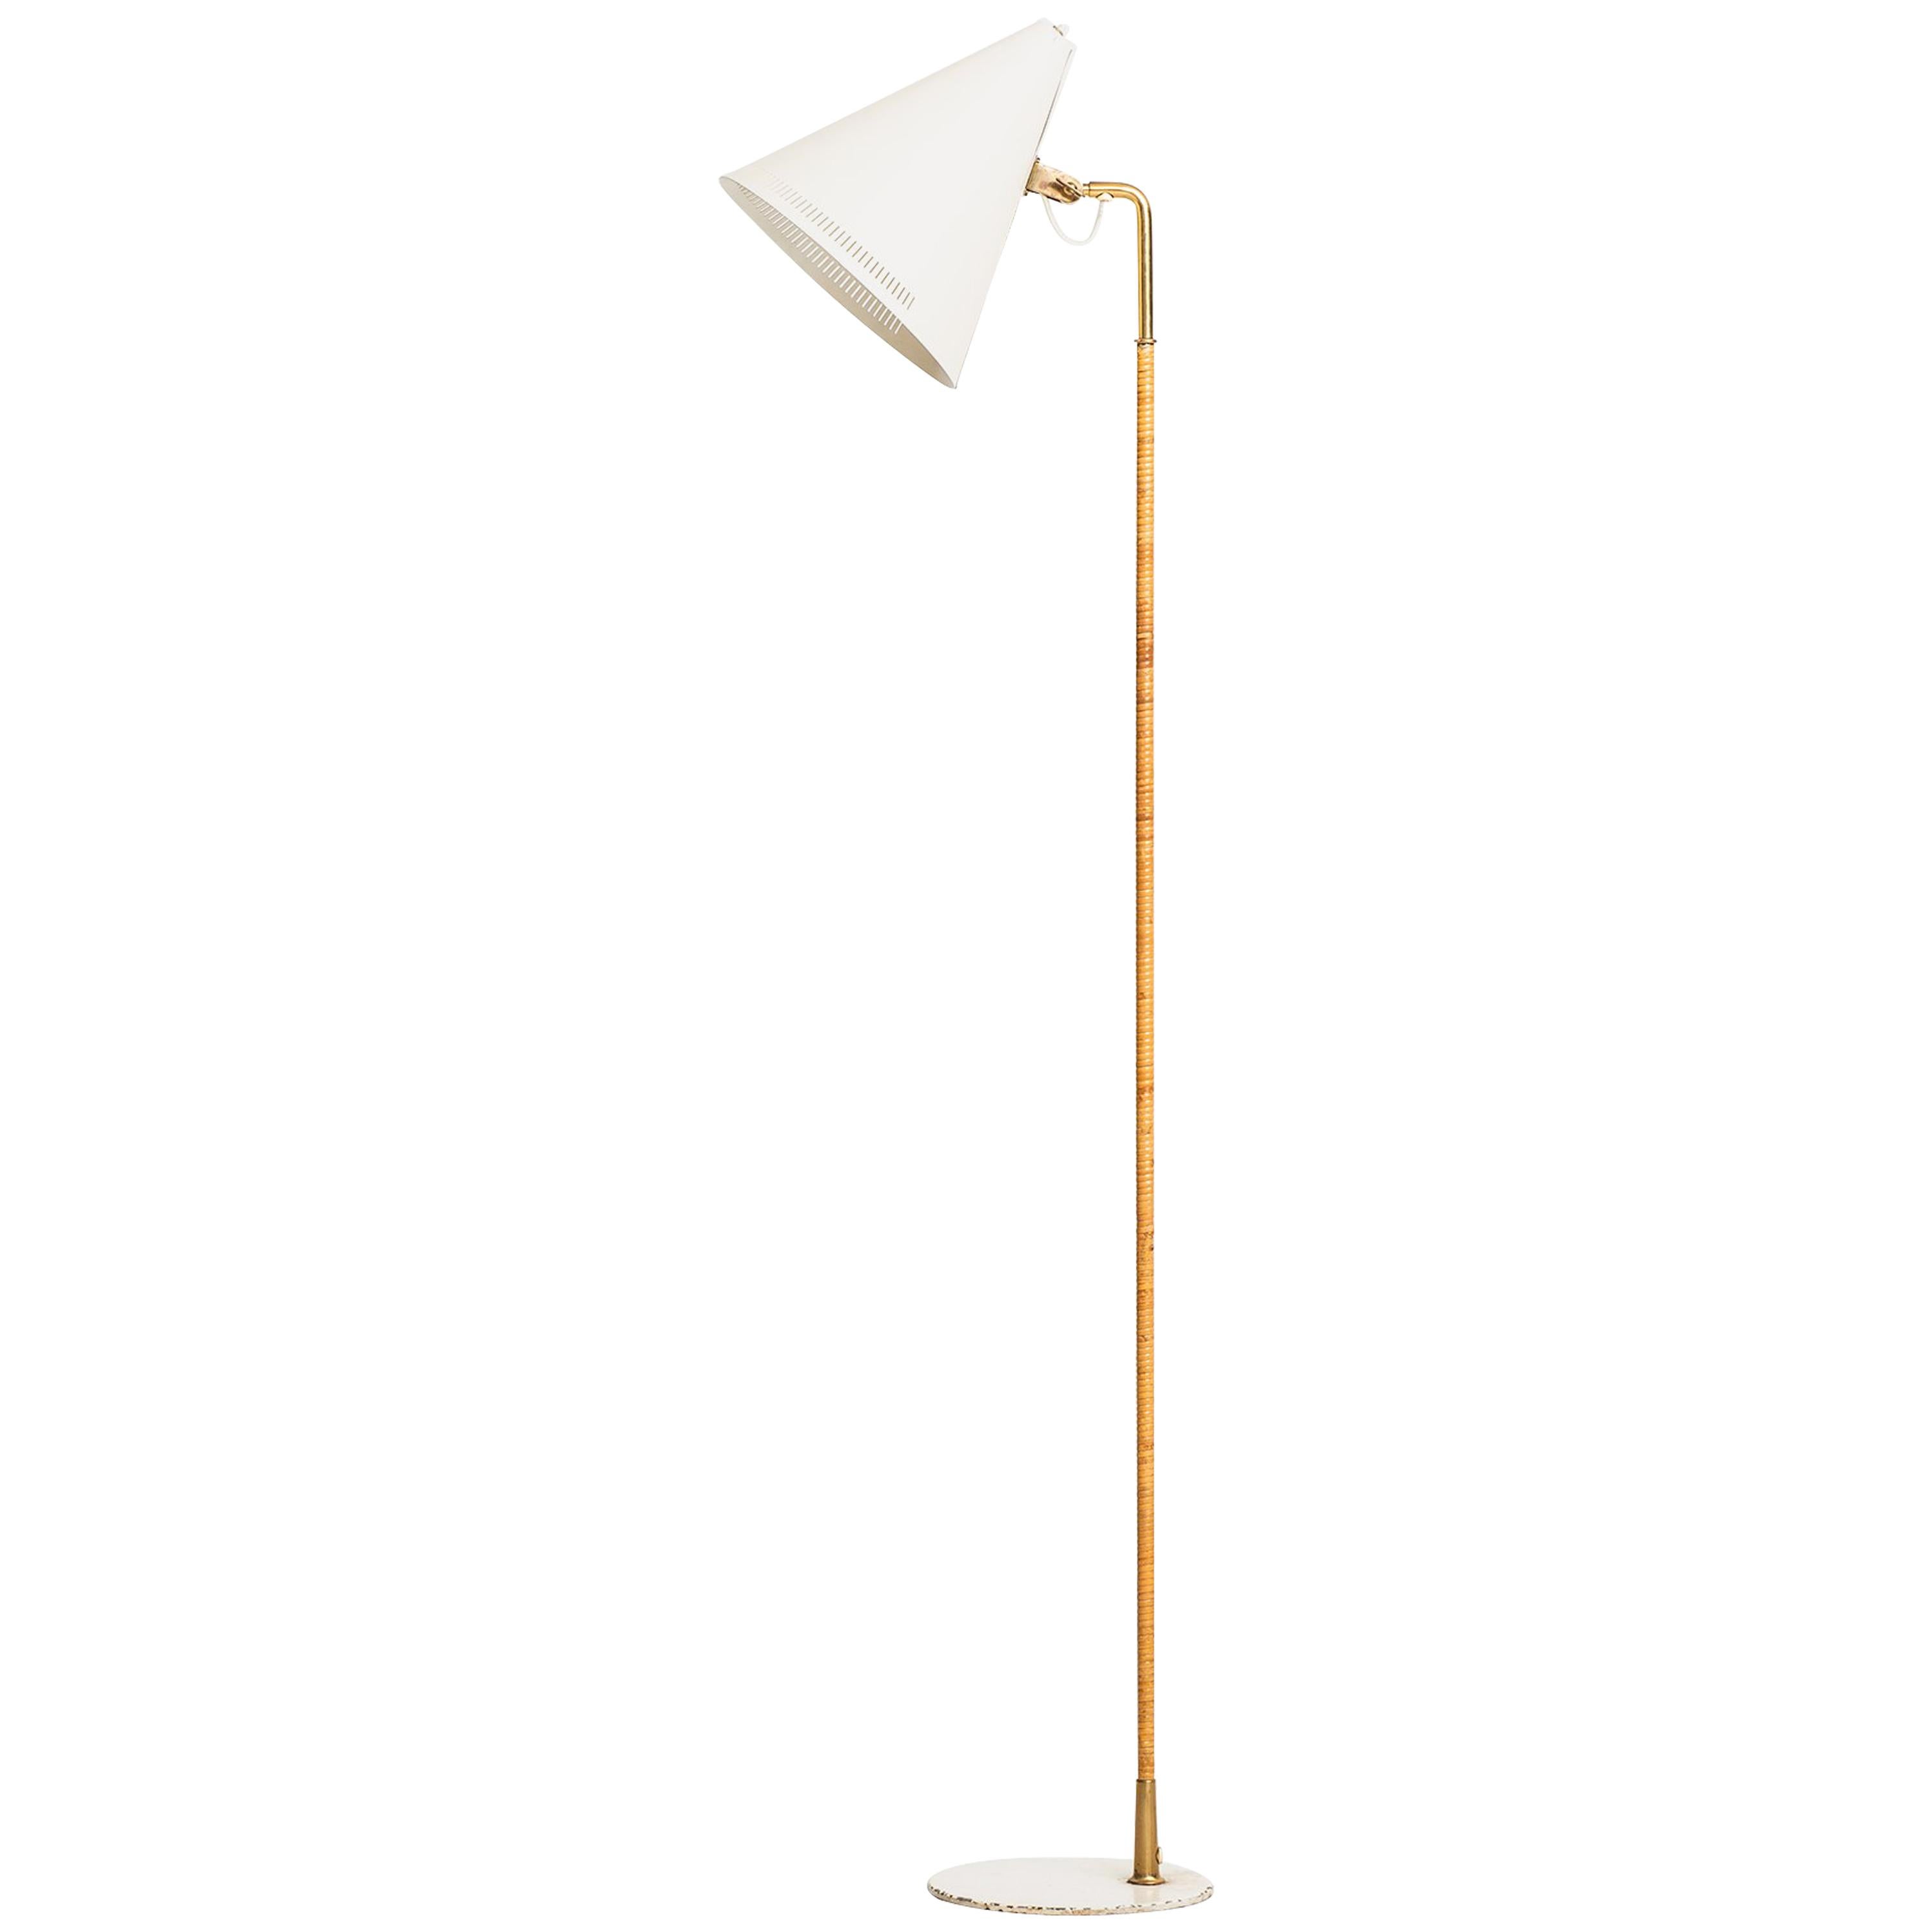 Paavo Tynell Early Floor Lamp Model K-10-10 by Taito Oy in Finland